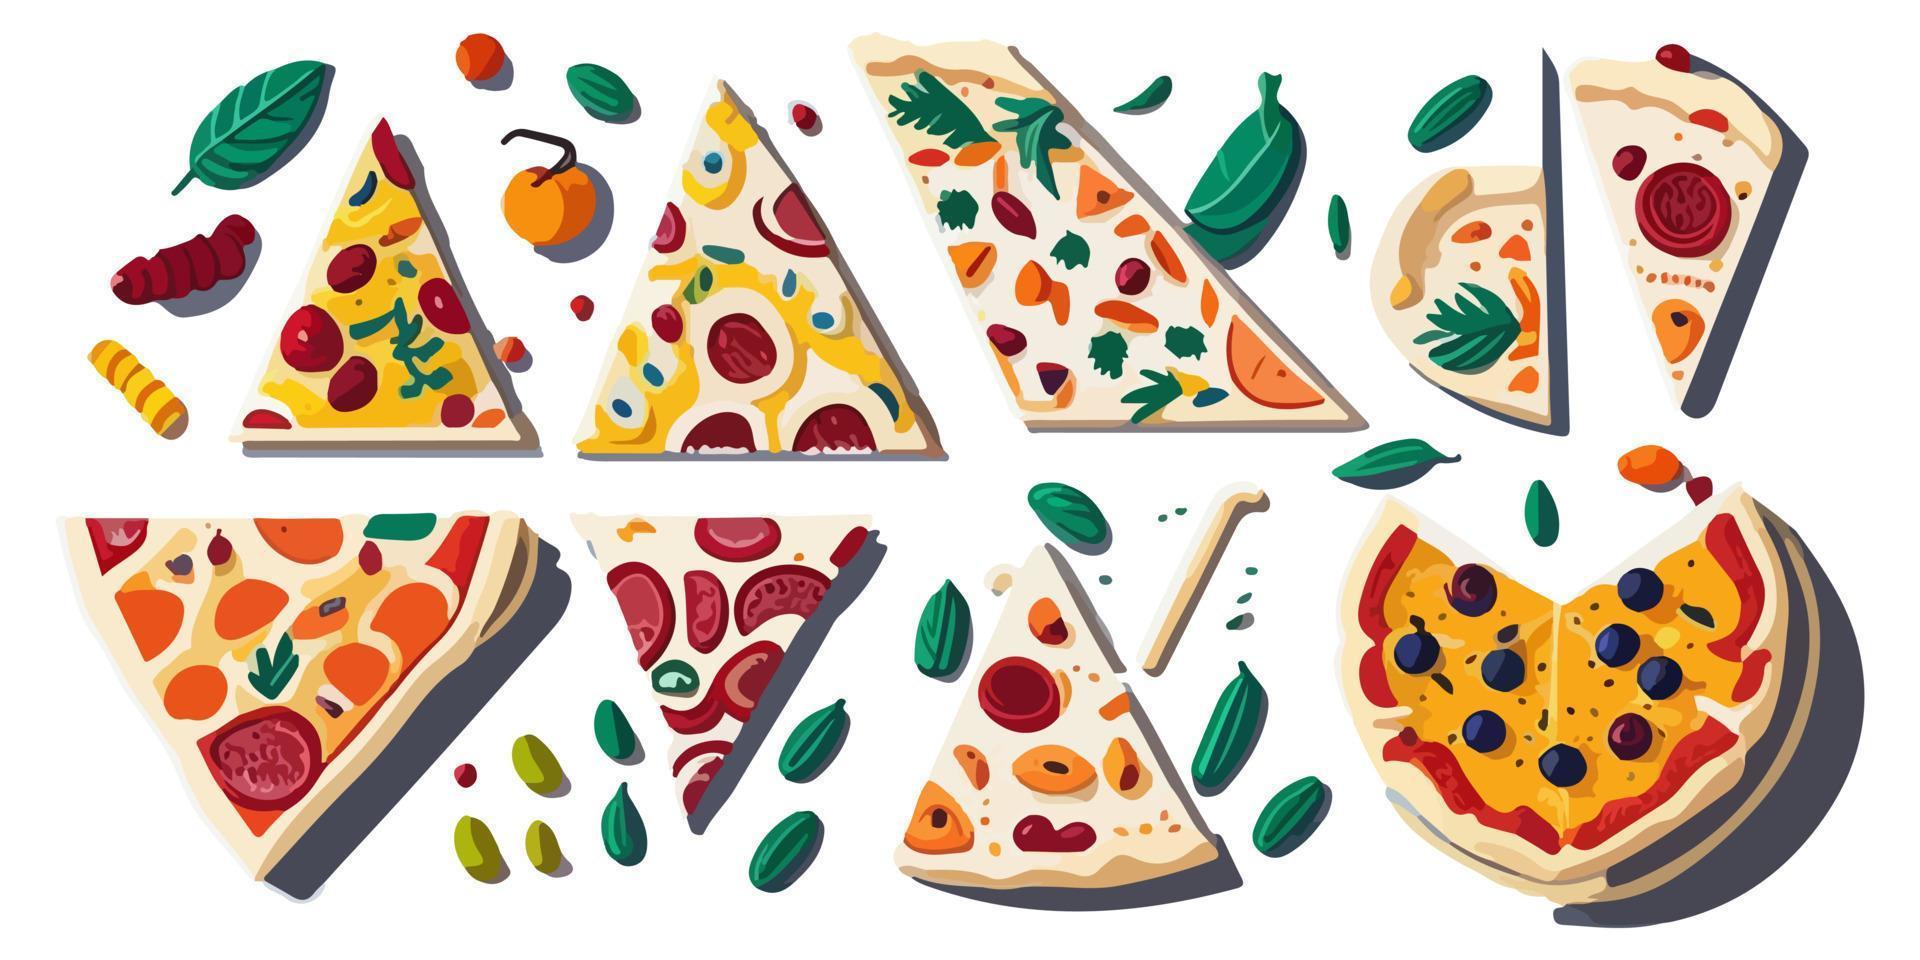 Pizza Box Illustration with Yummy and Tasty Pizza Slices vector